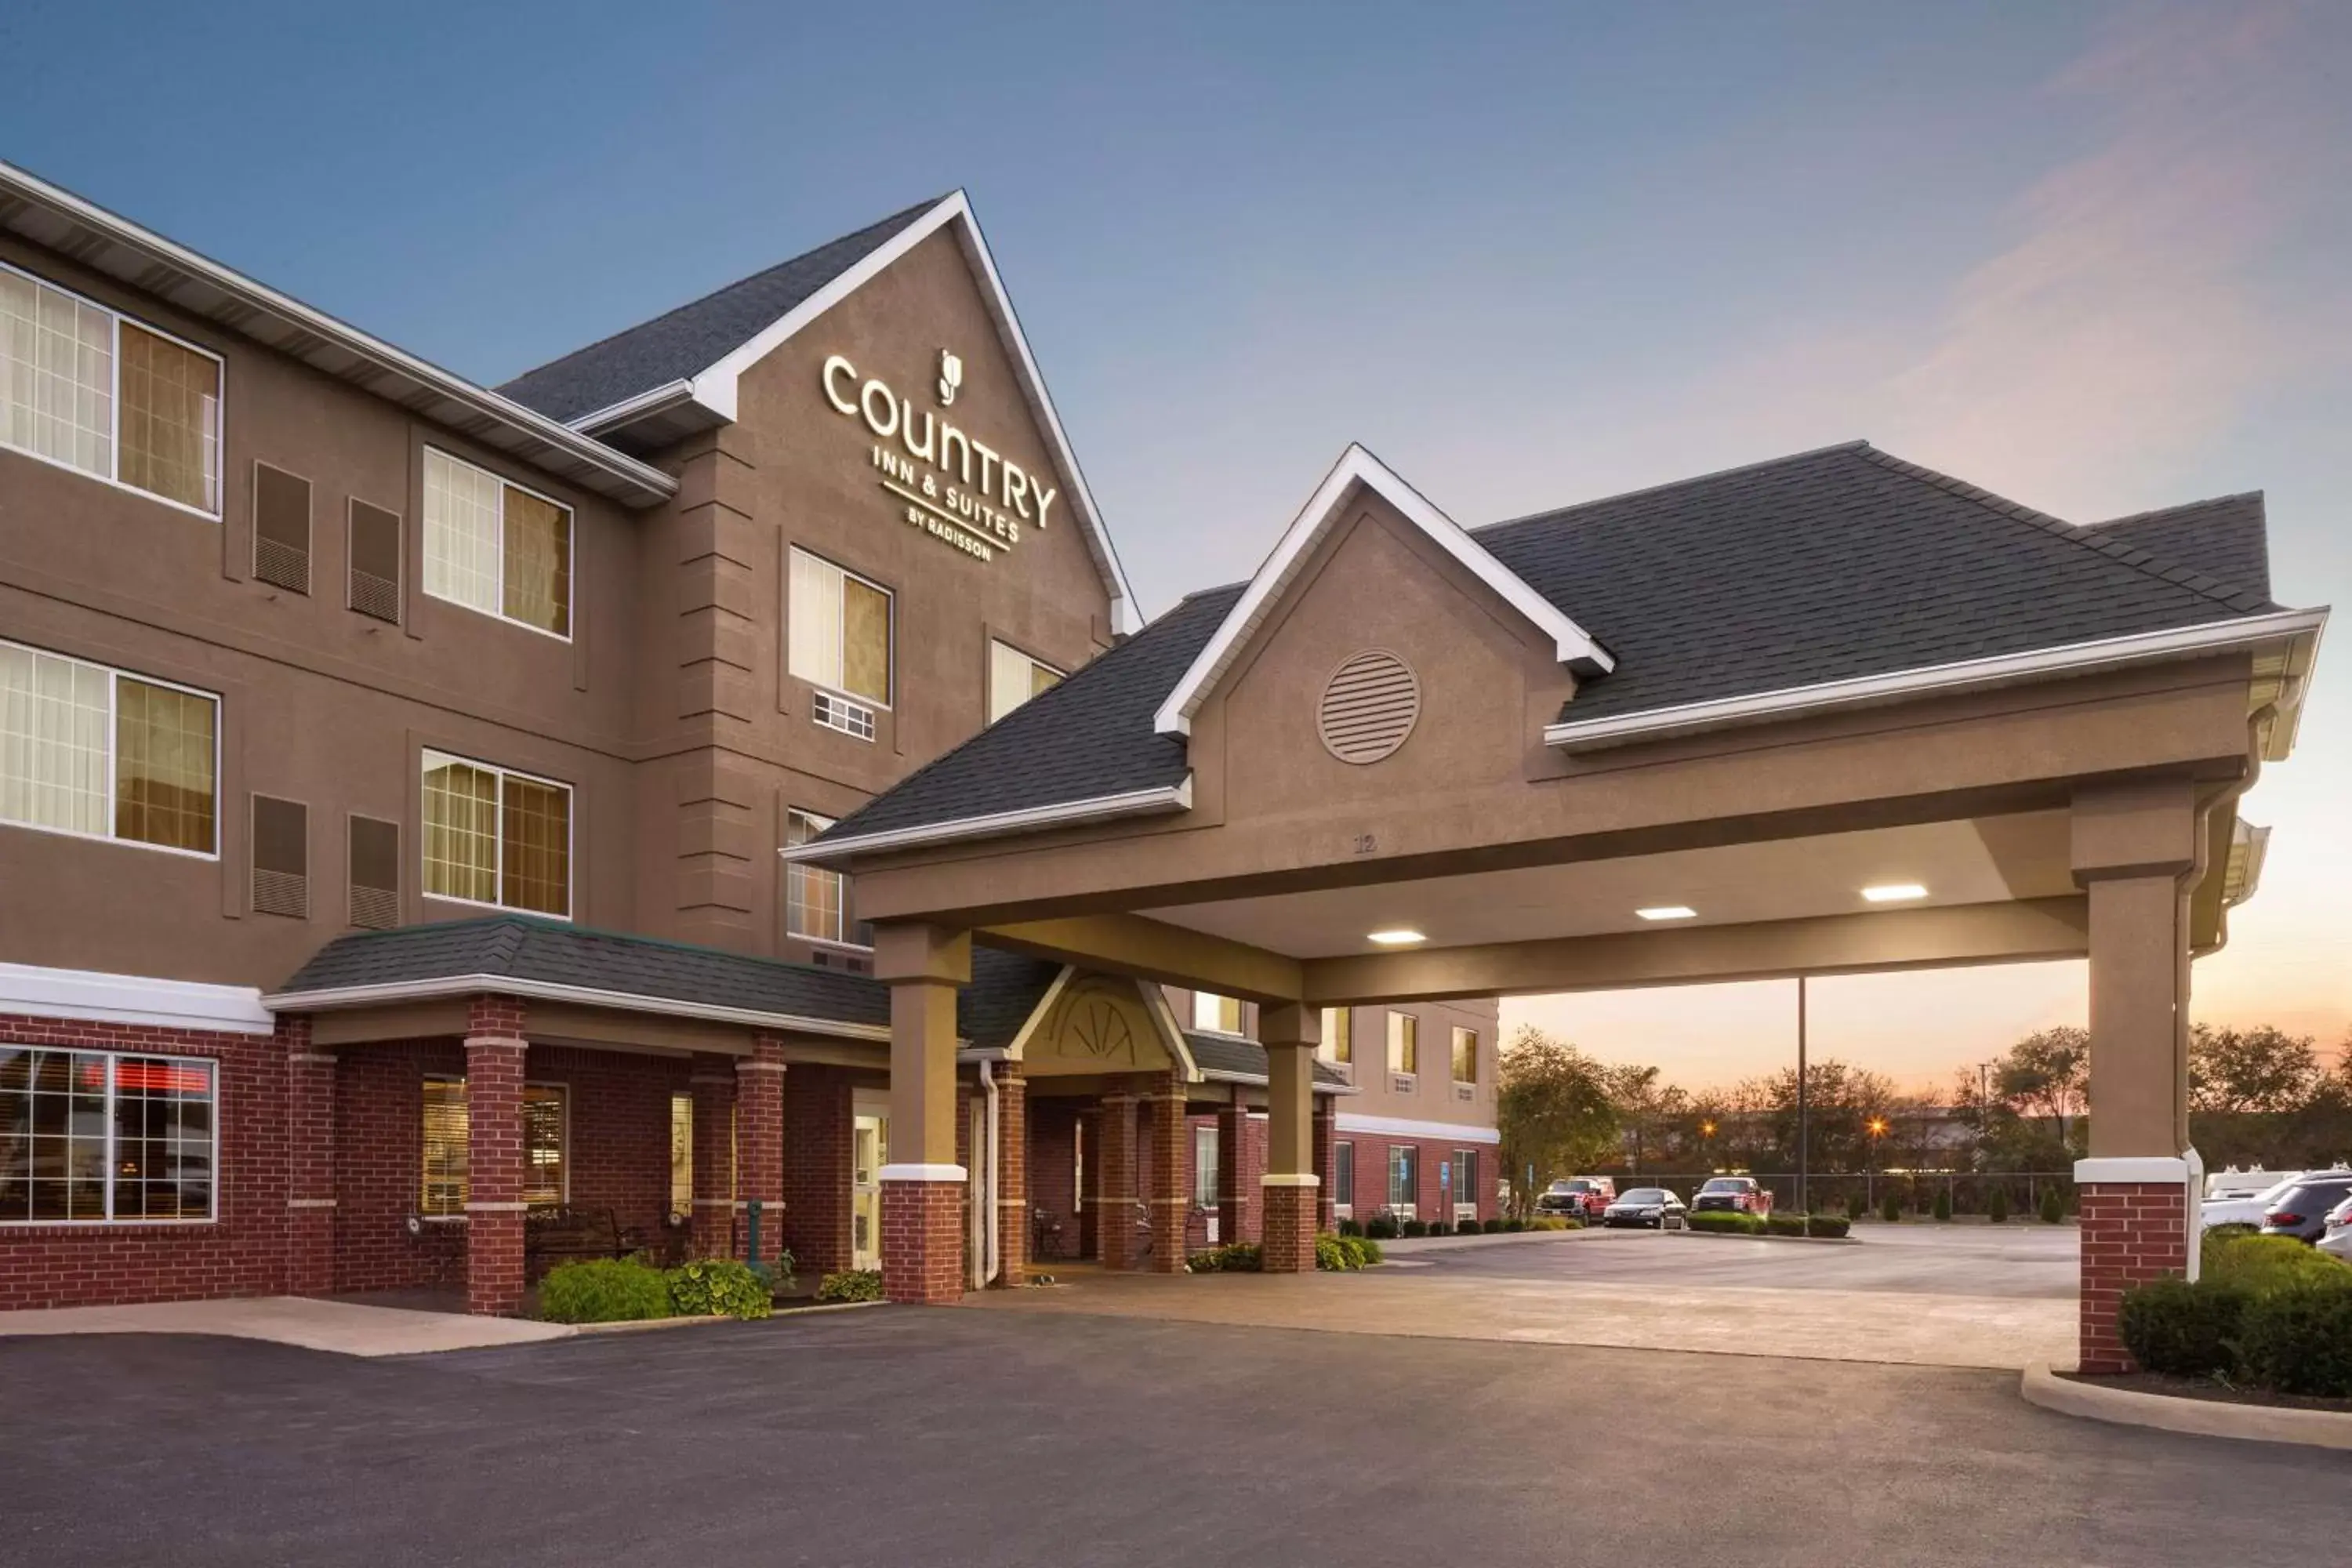 Property building in Country Inn & Suites by Radisson, Lima, OH